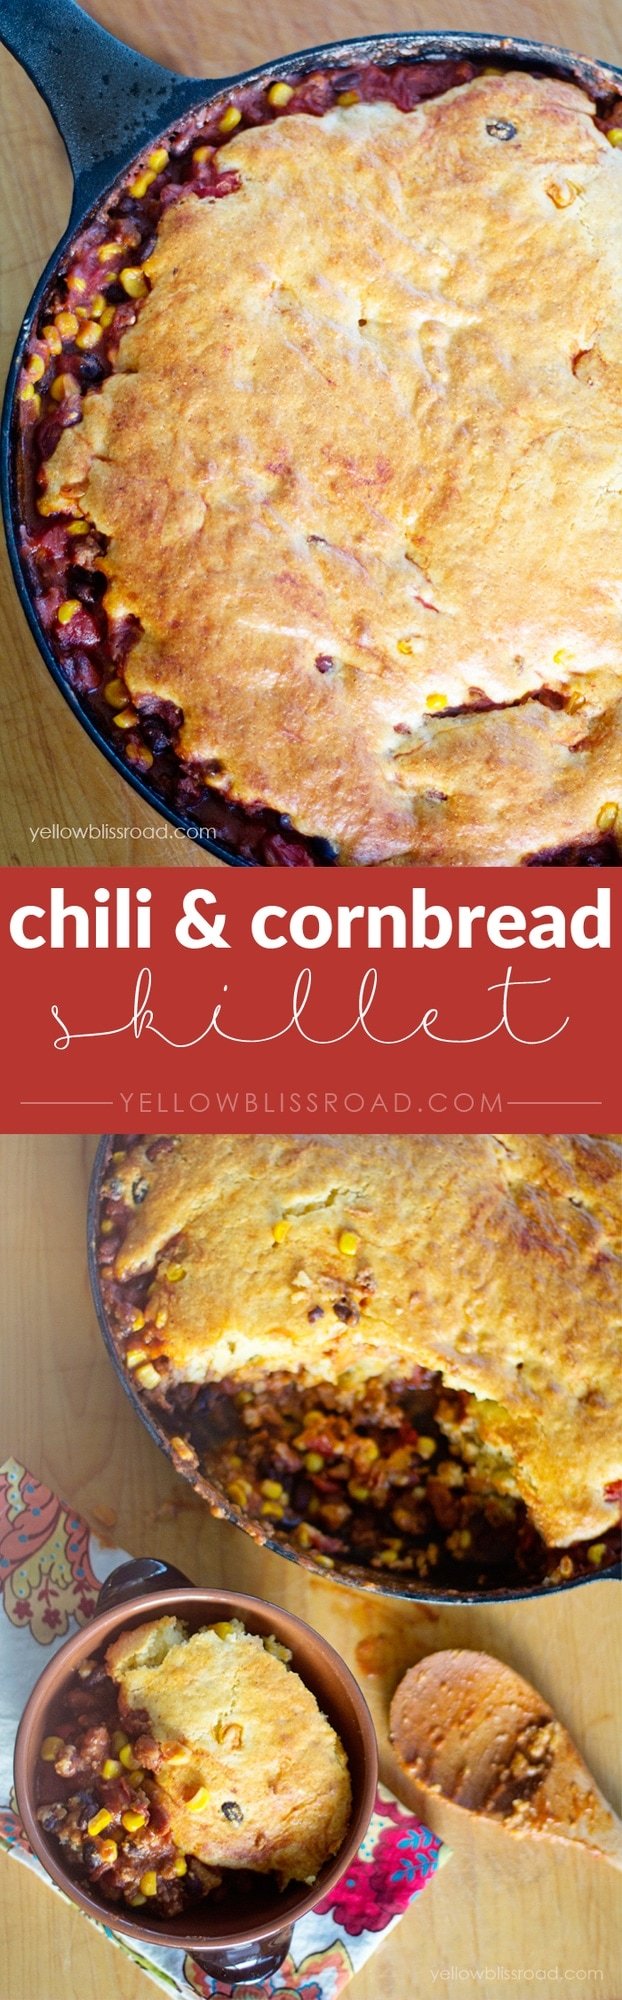 Chili and Cornbread Skillet - A hearty meal cooked all in one pan!